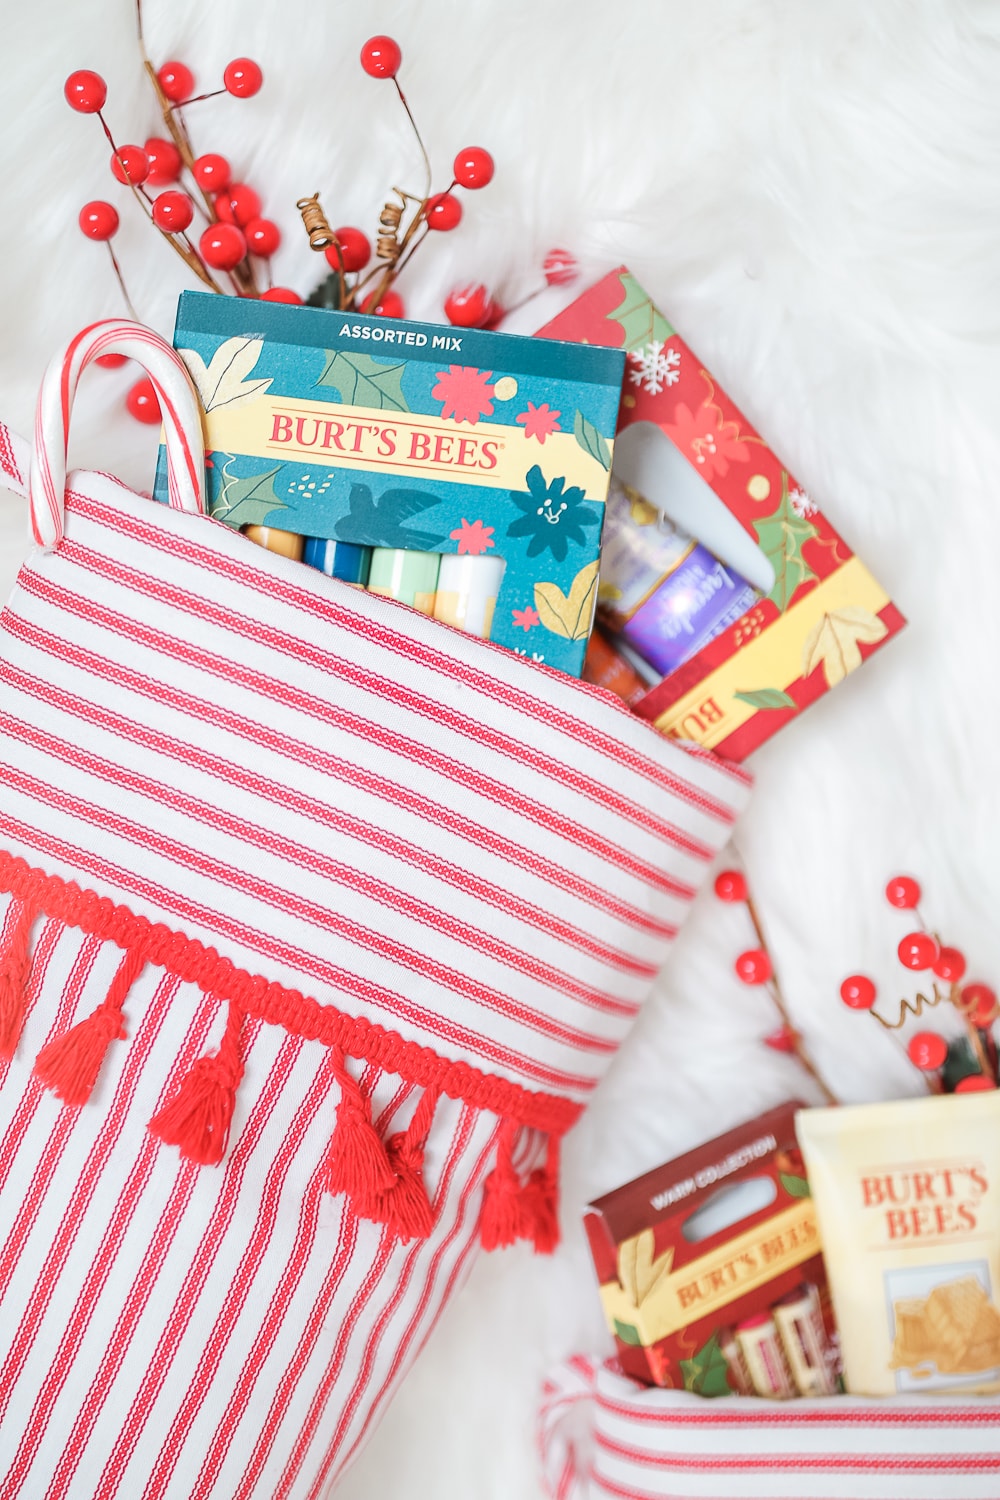 Best Burt's Bees gift sets under 15 by blogger Stephanie Ziajka on Diary of a Debutante